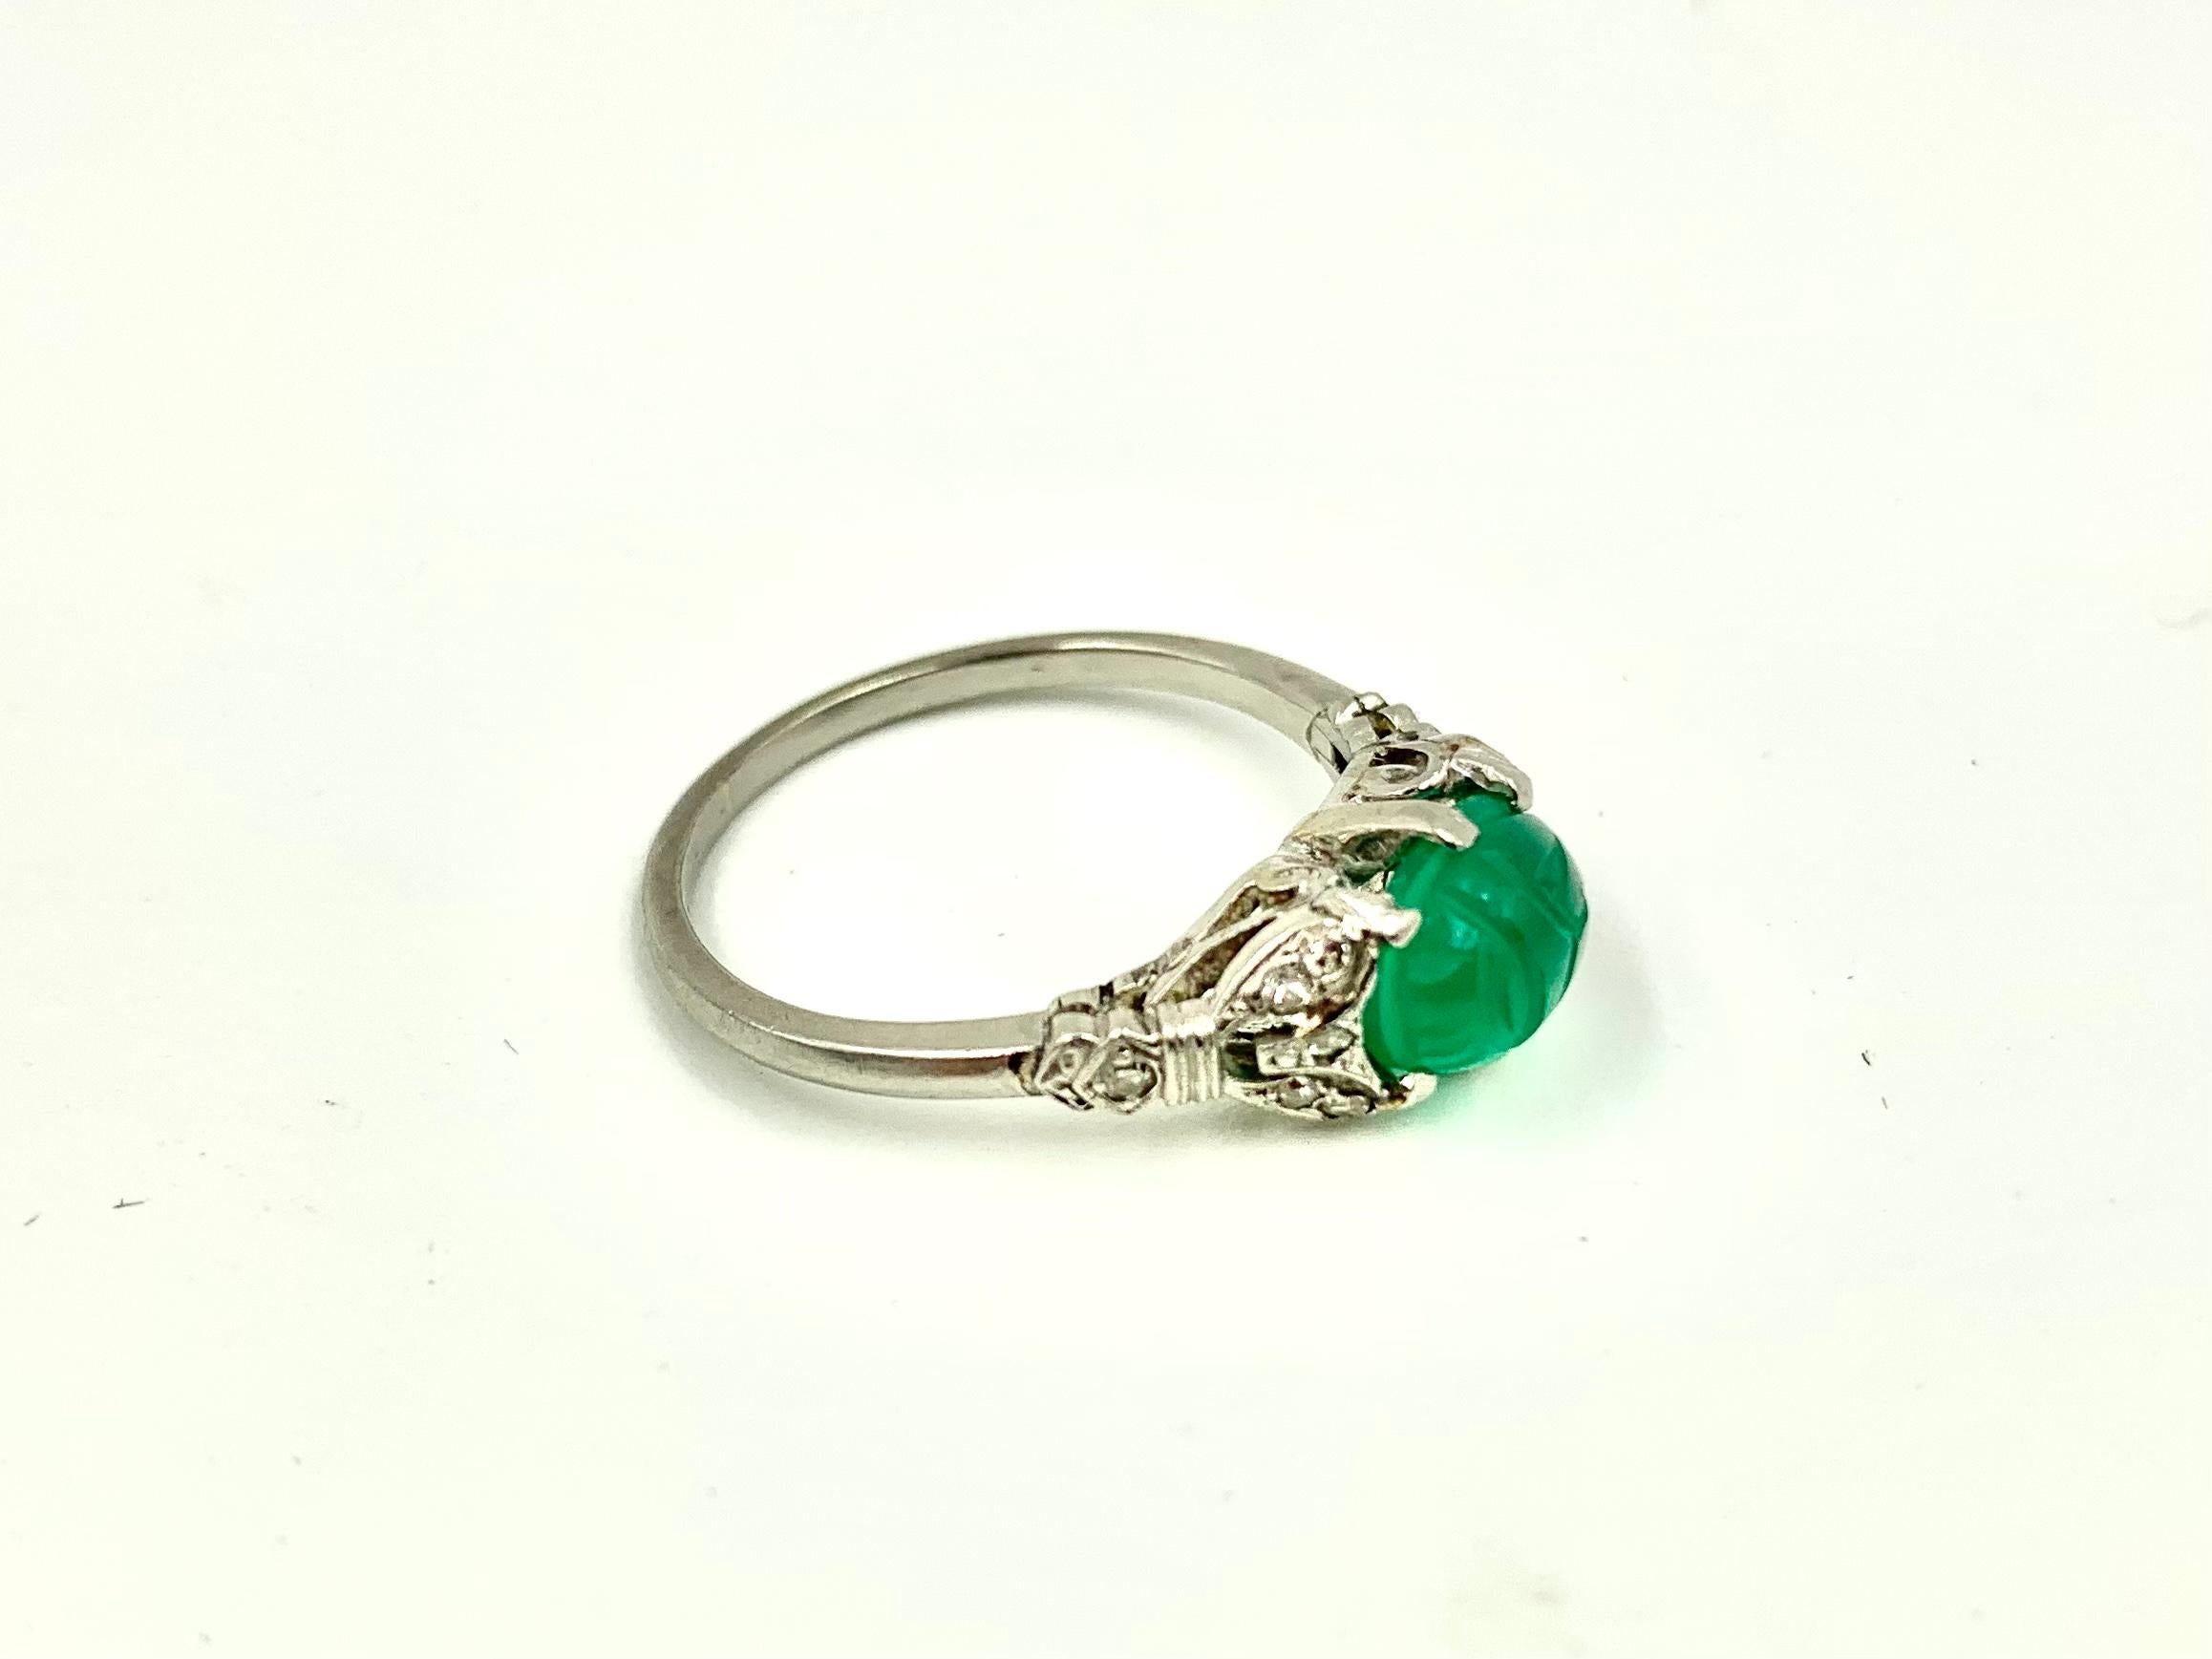 Beautiful Art Deco period 18K white gold, diamond, carved green onyx scarab ring, circa 1920.
Featuring 12 small old-mine cut diamonds, six on each side of the scarab, in an attractive 18k white gold setting.
Makers mark on the interior of band,